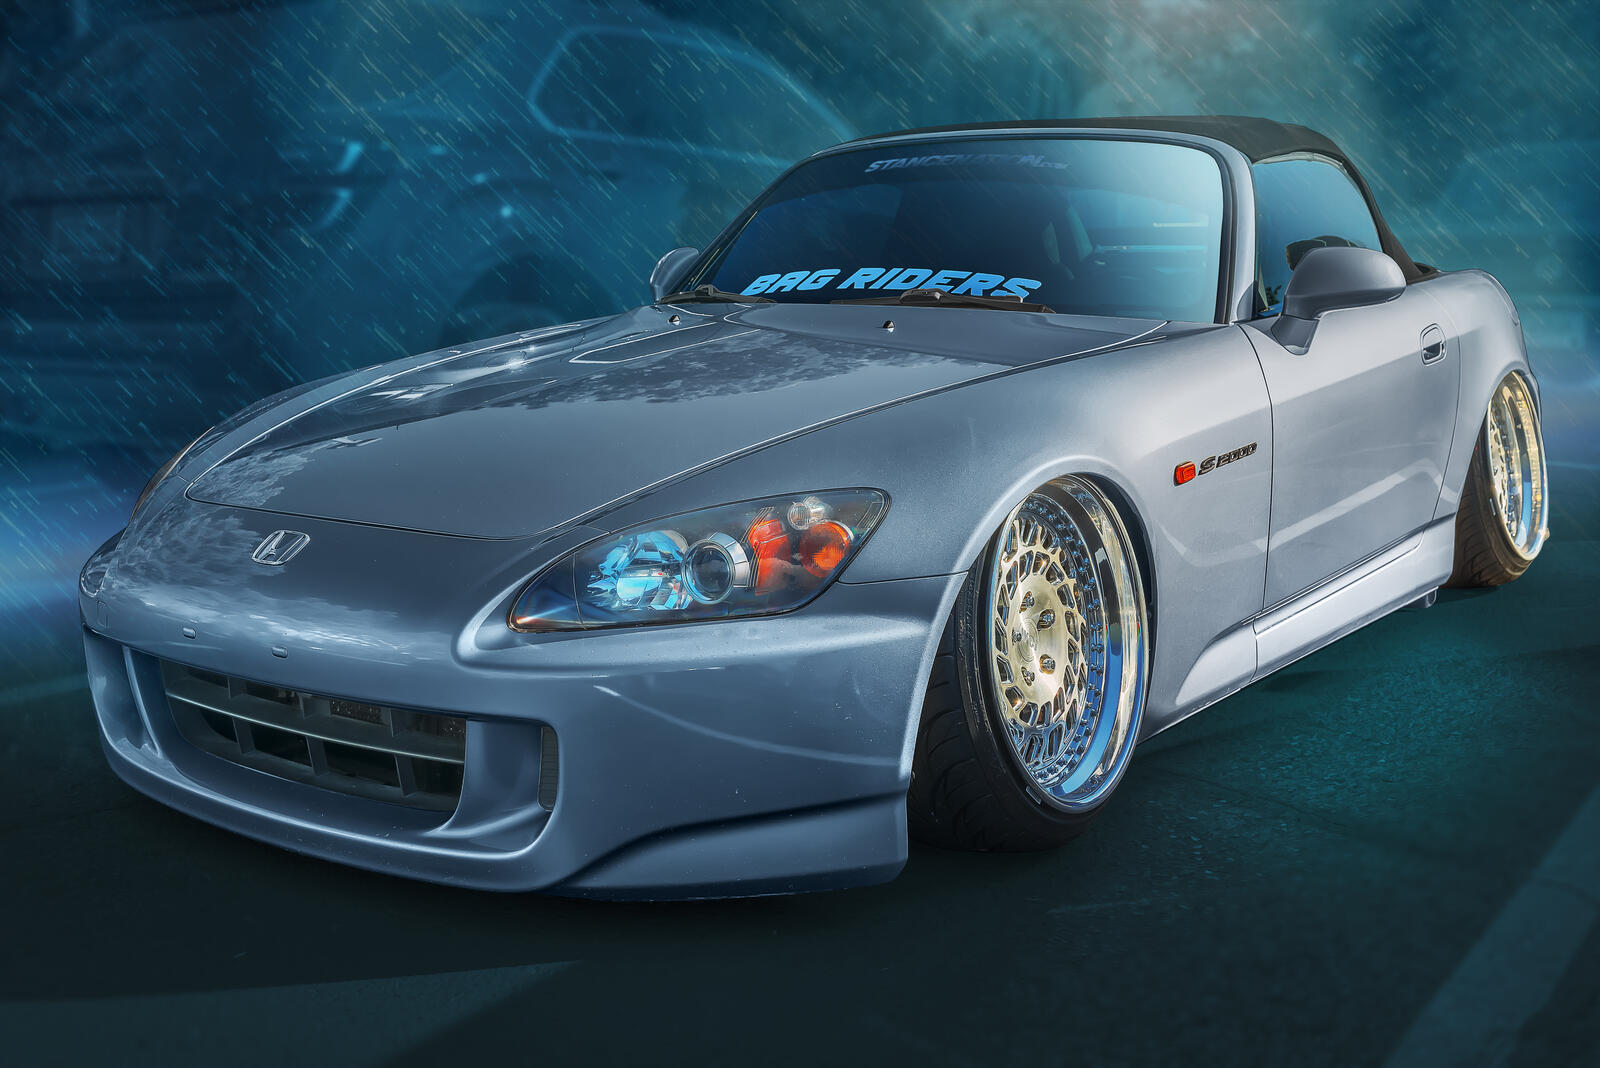 Wallpapers vehicle S2000 Car on the desktop